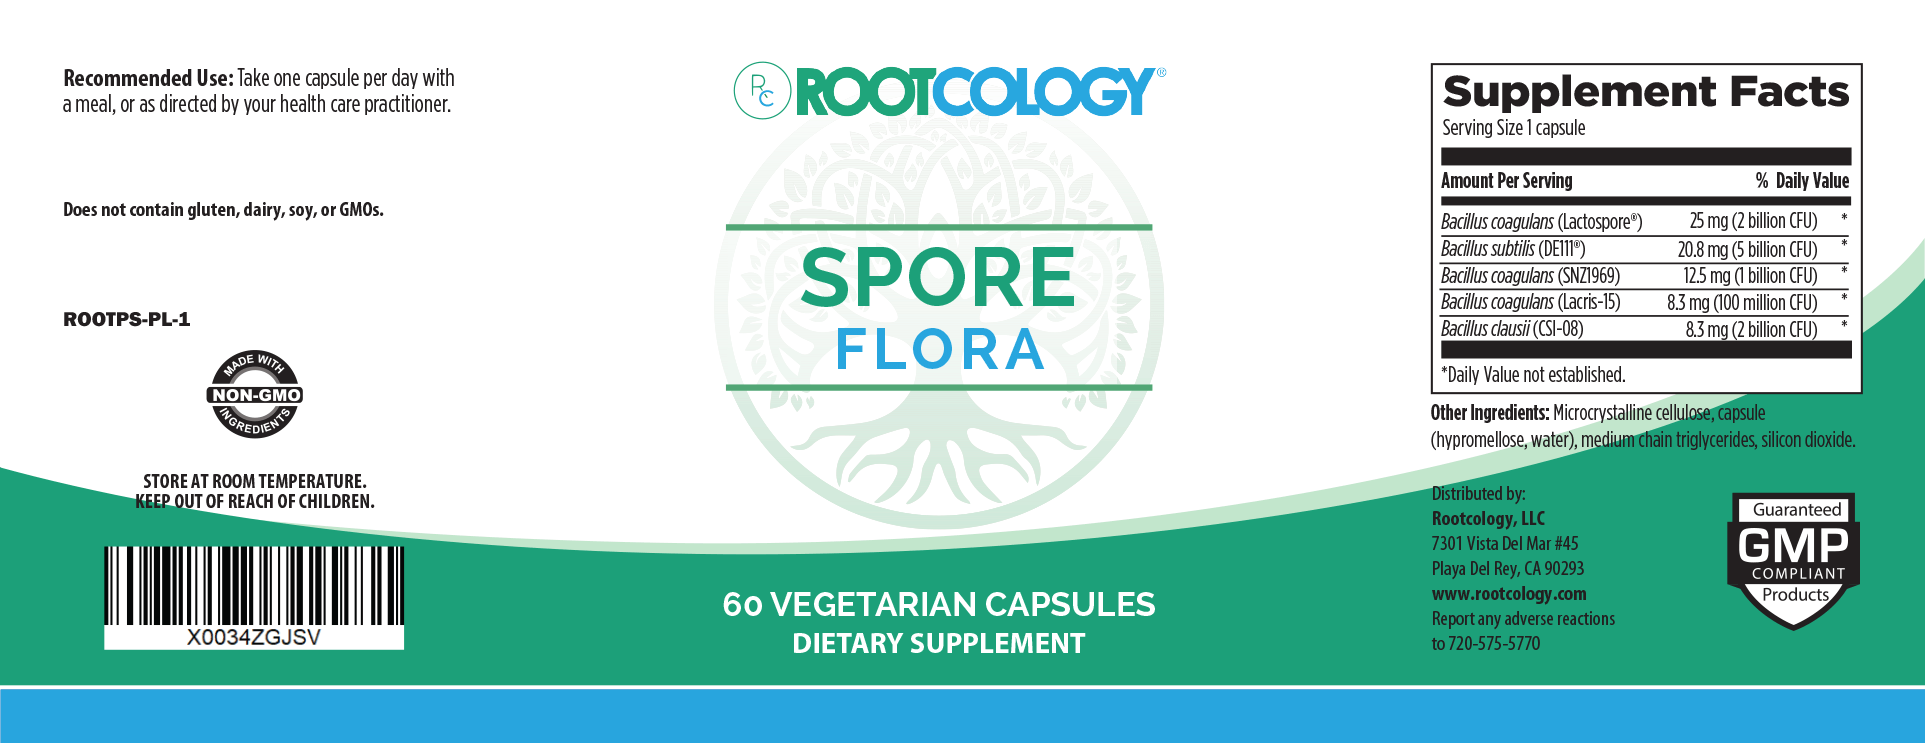 Rootcology Spore Flora Supplement Label